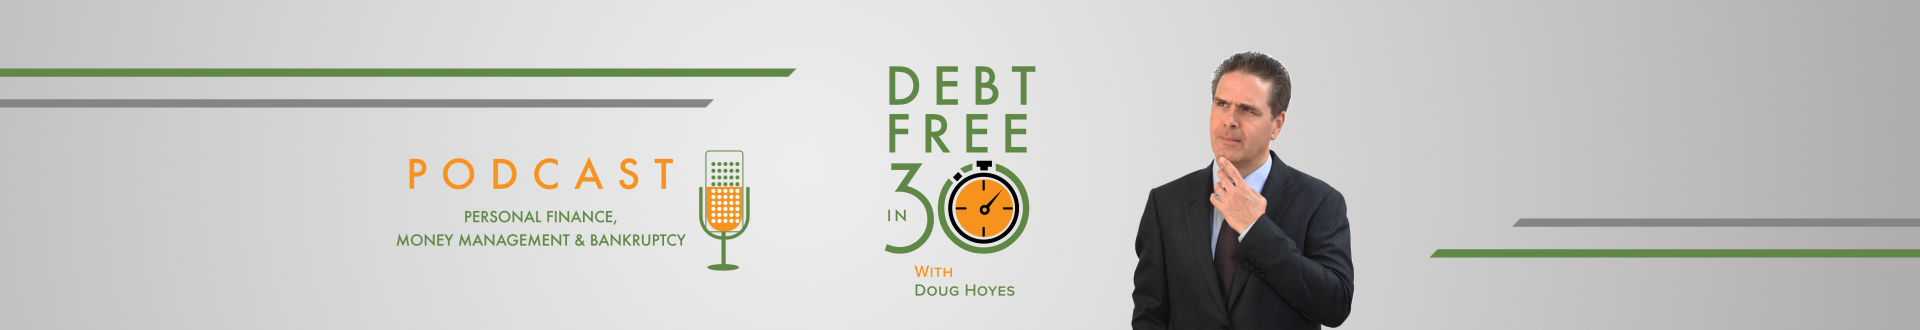 Debt Free in 30 Podcast Archive - Page 43